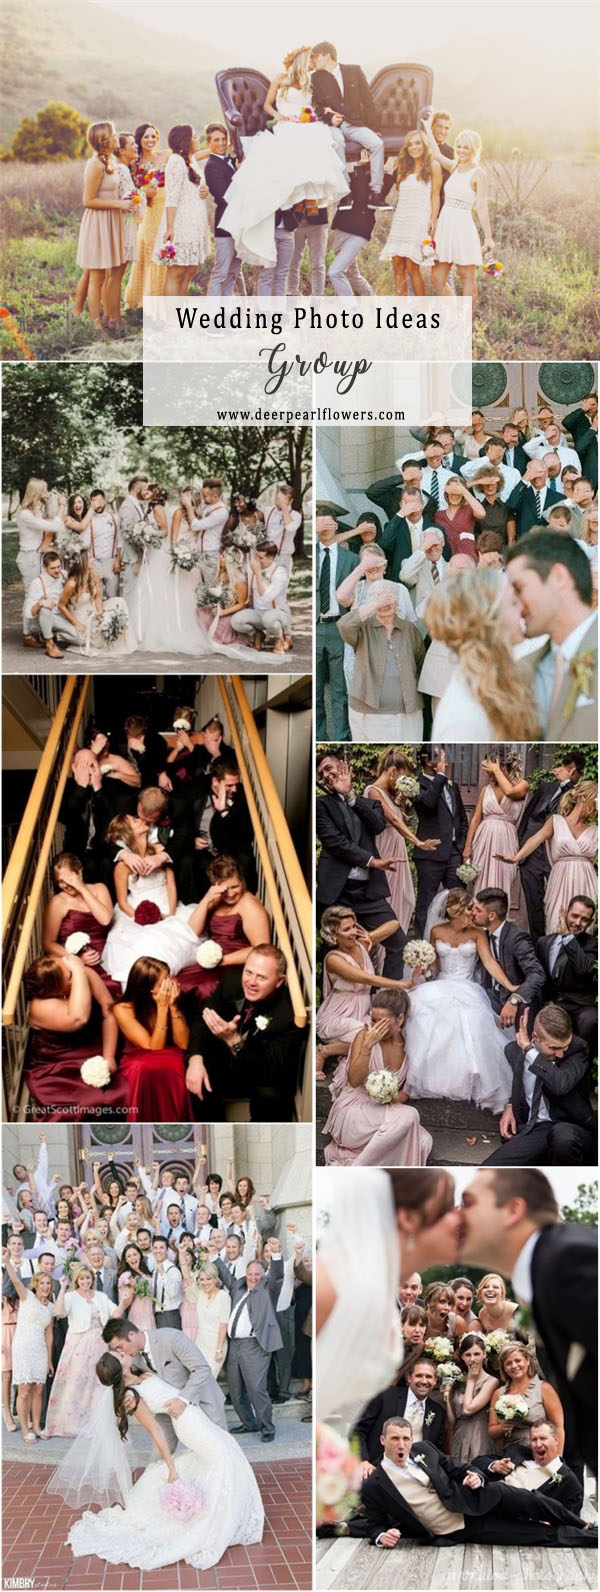 Wedding group photo ideas and poses